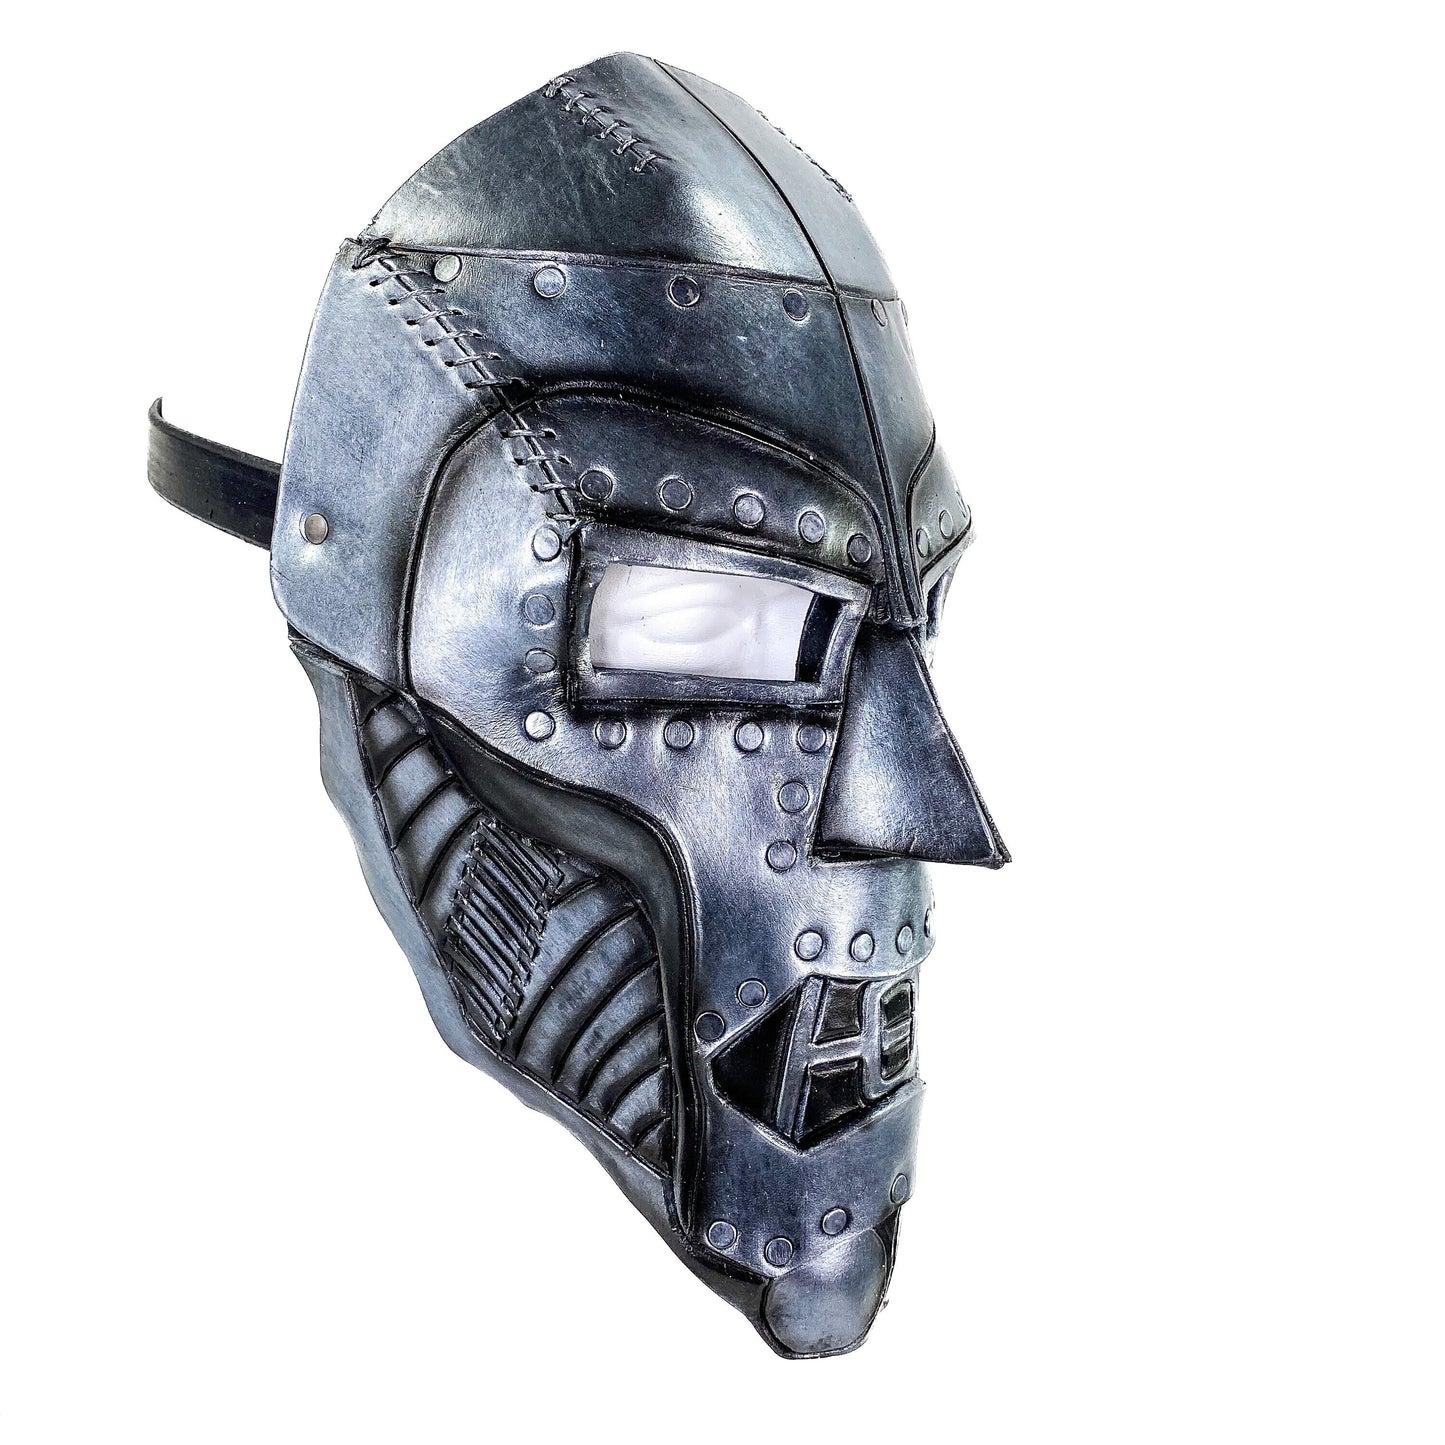 Genuine Leather Mask - Weathered Steel Paint - Handmade Full Face Cover for Masquerades Halloween or Cosplay Costume